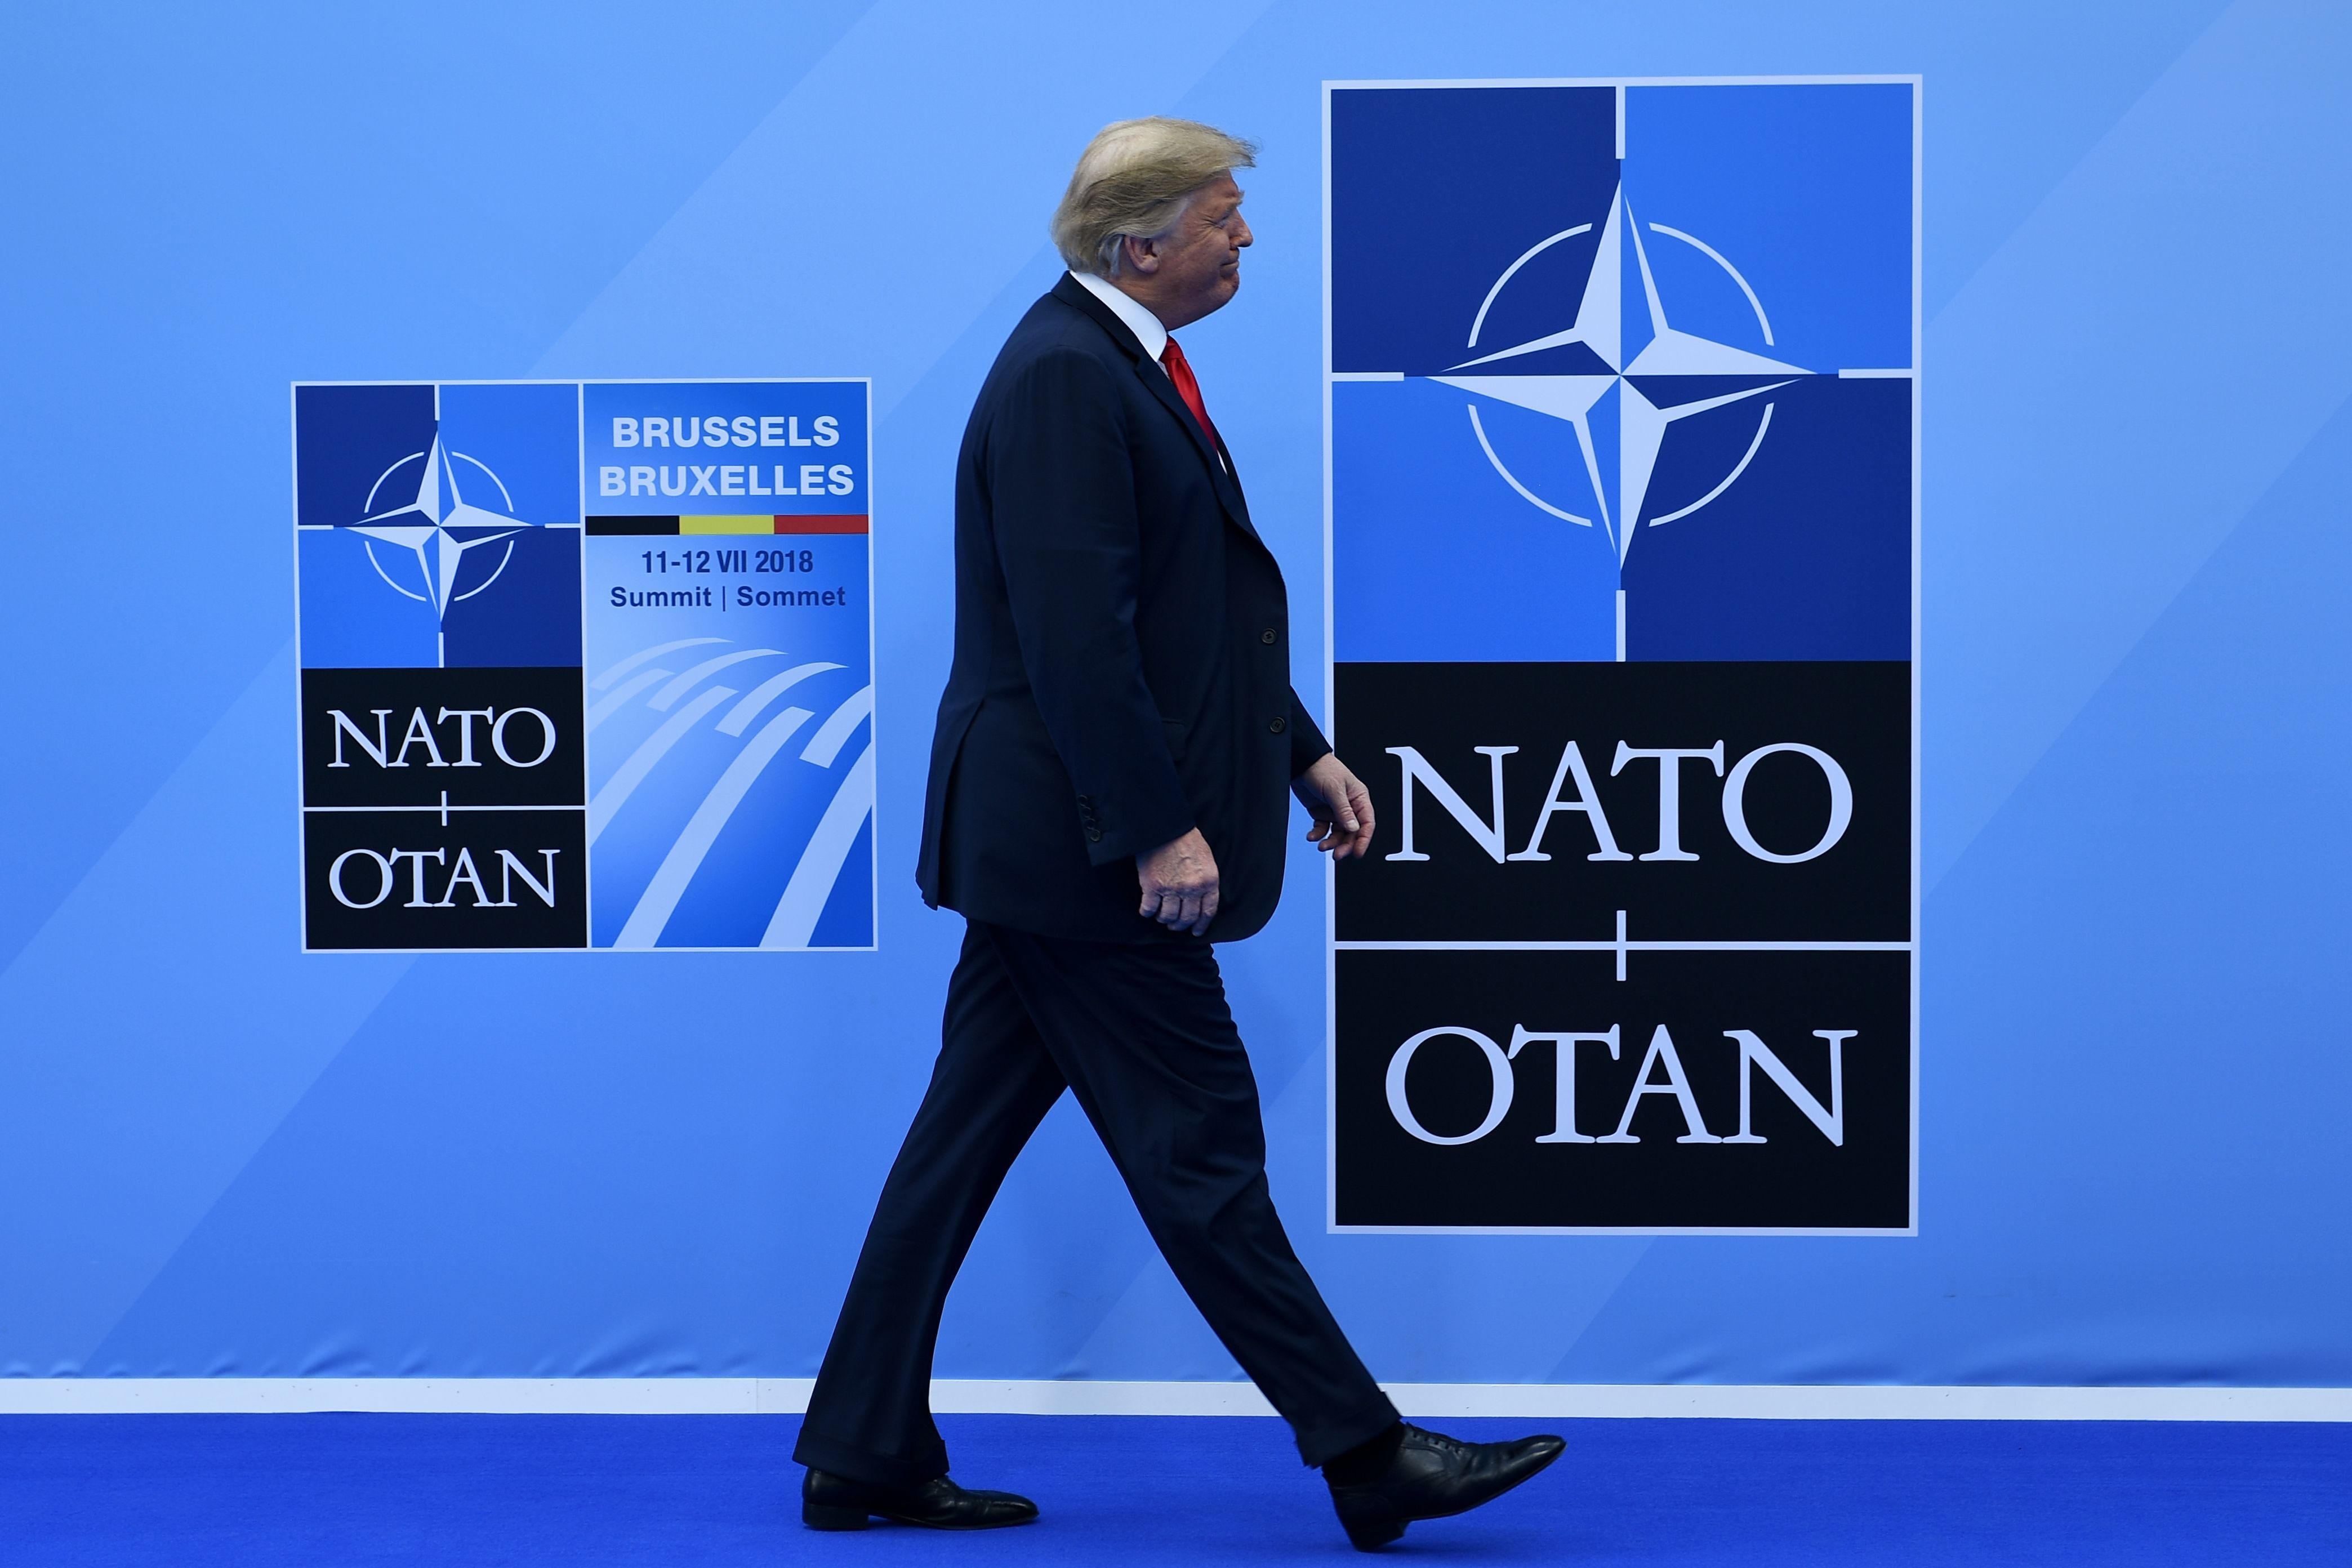 President Trump arrives at the NATO summit in Brussels. The House is scheduled to take up a measure Wednesday reaffirming U.S. support for NATO; the Senate approved a similar measure Tuesday.
